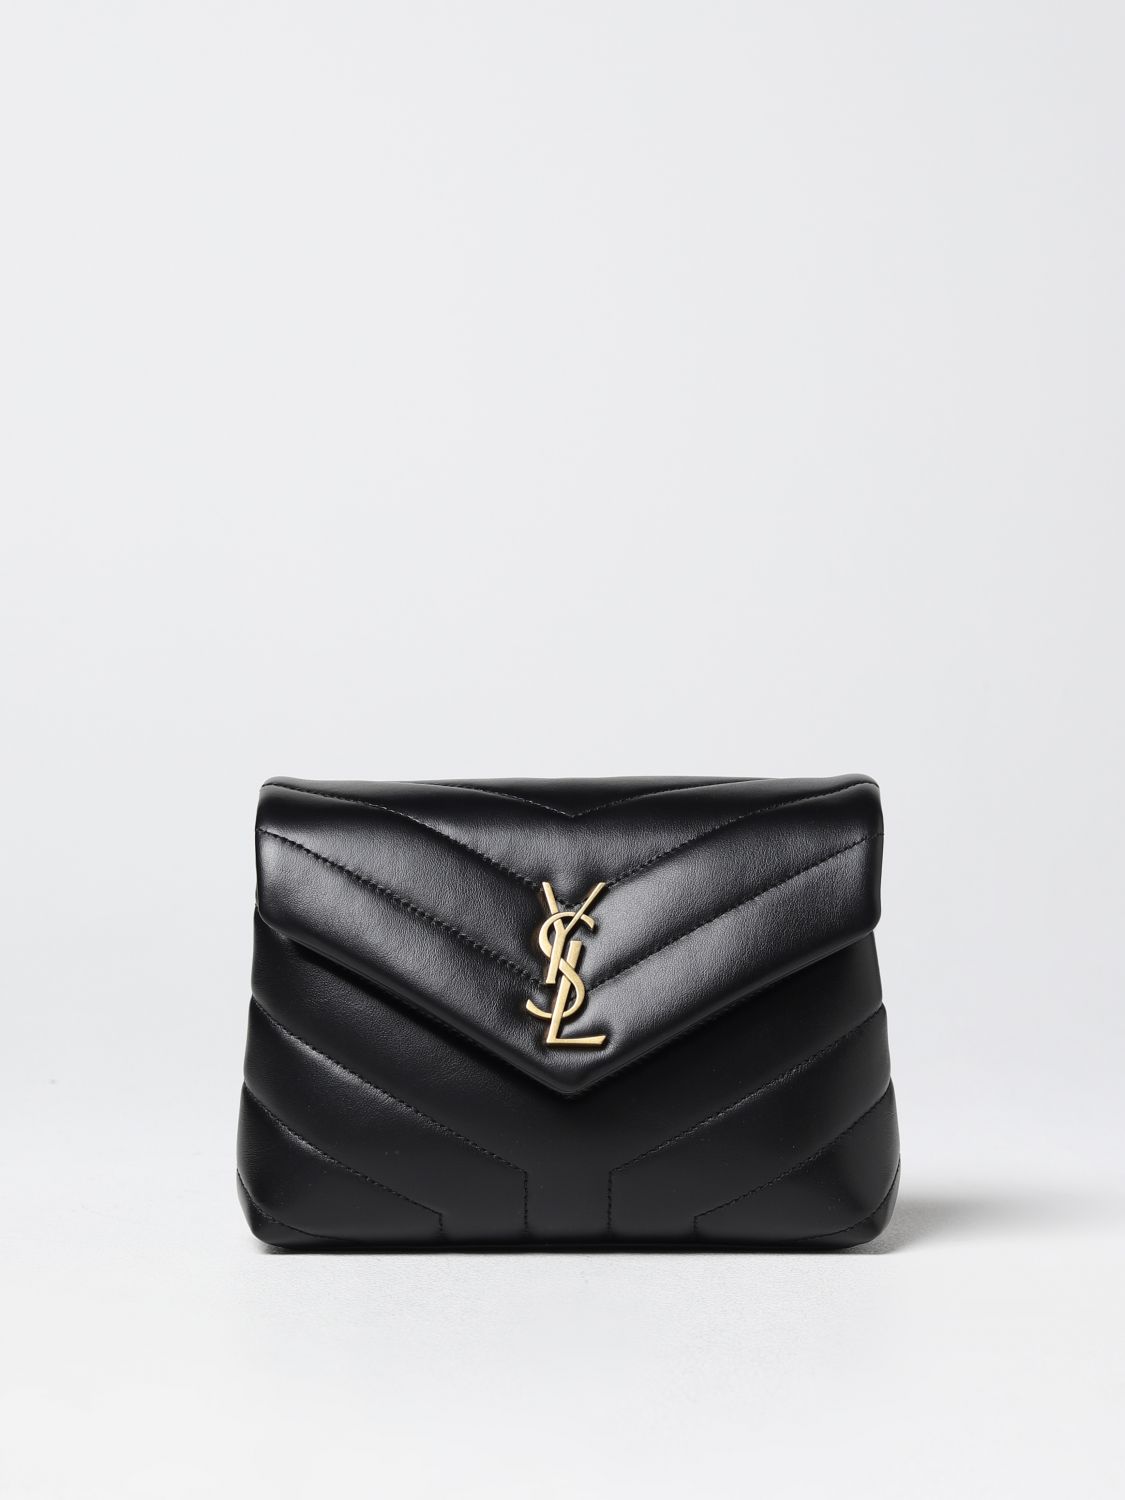 Saint Laurent LouLou Shoulder Bag Toy Black in Leather with Silver